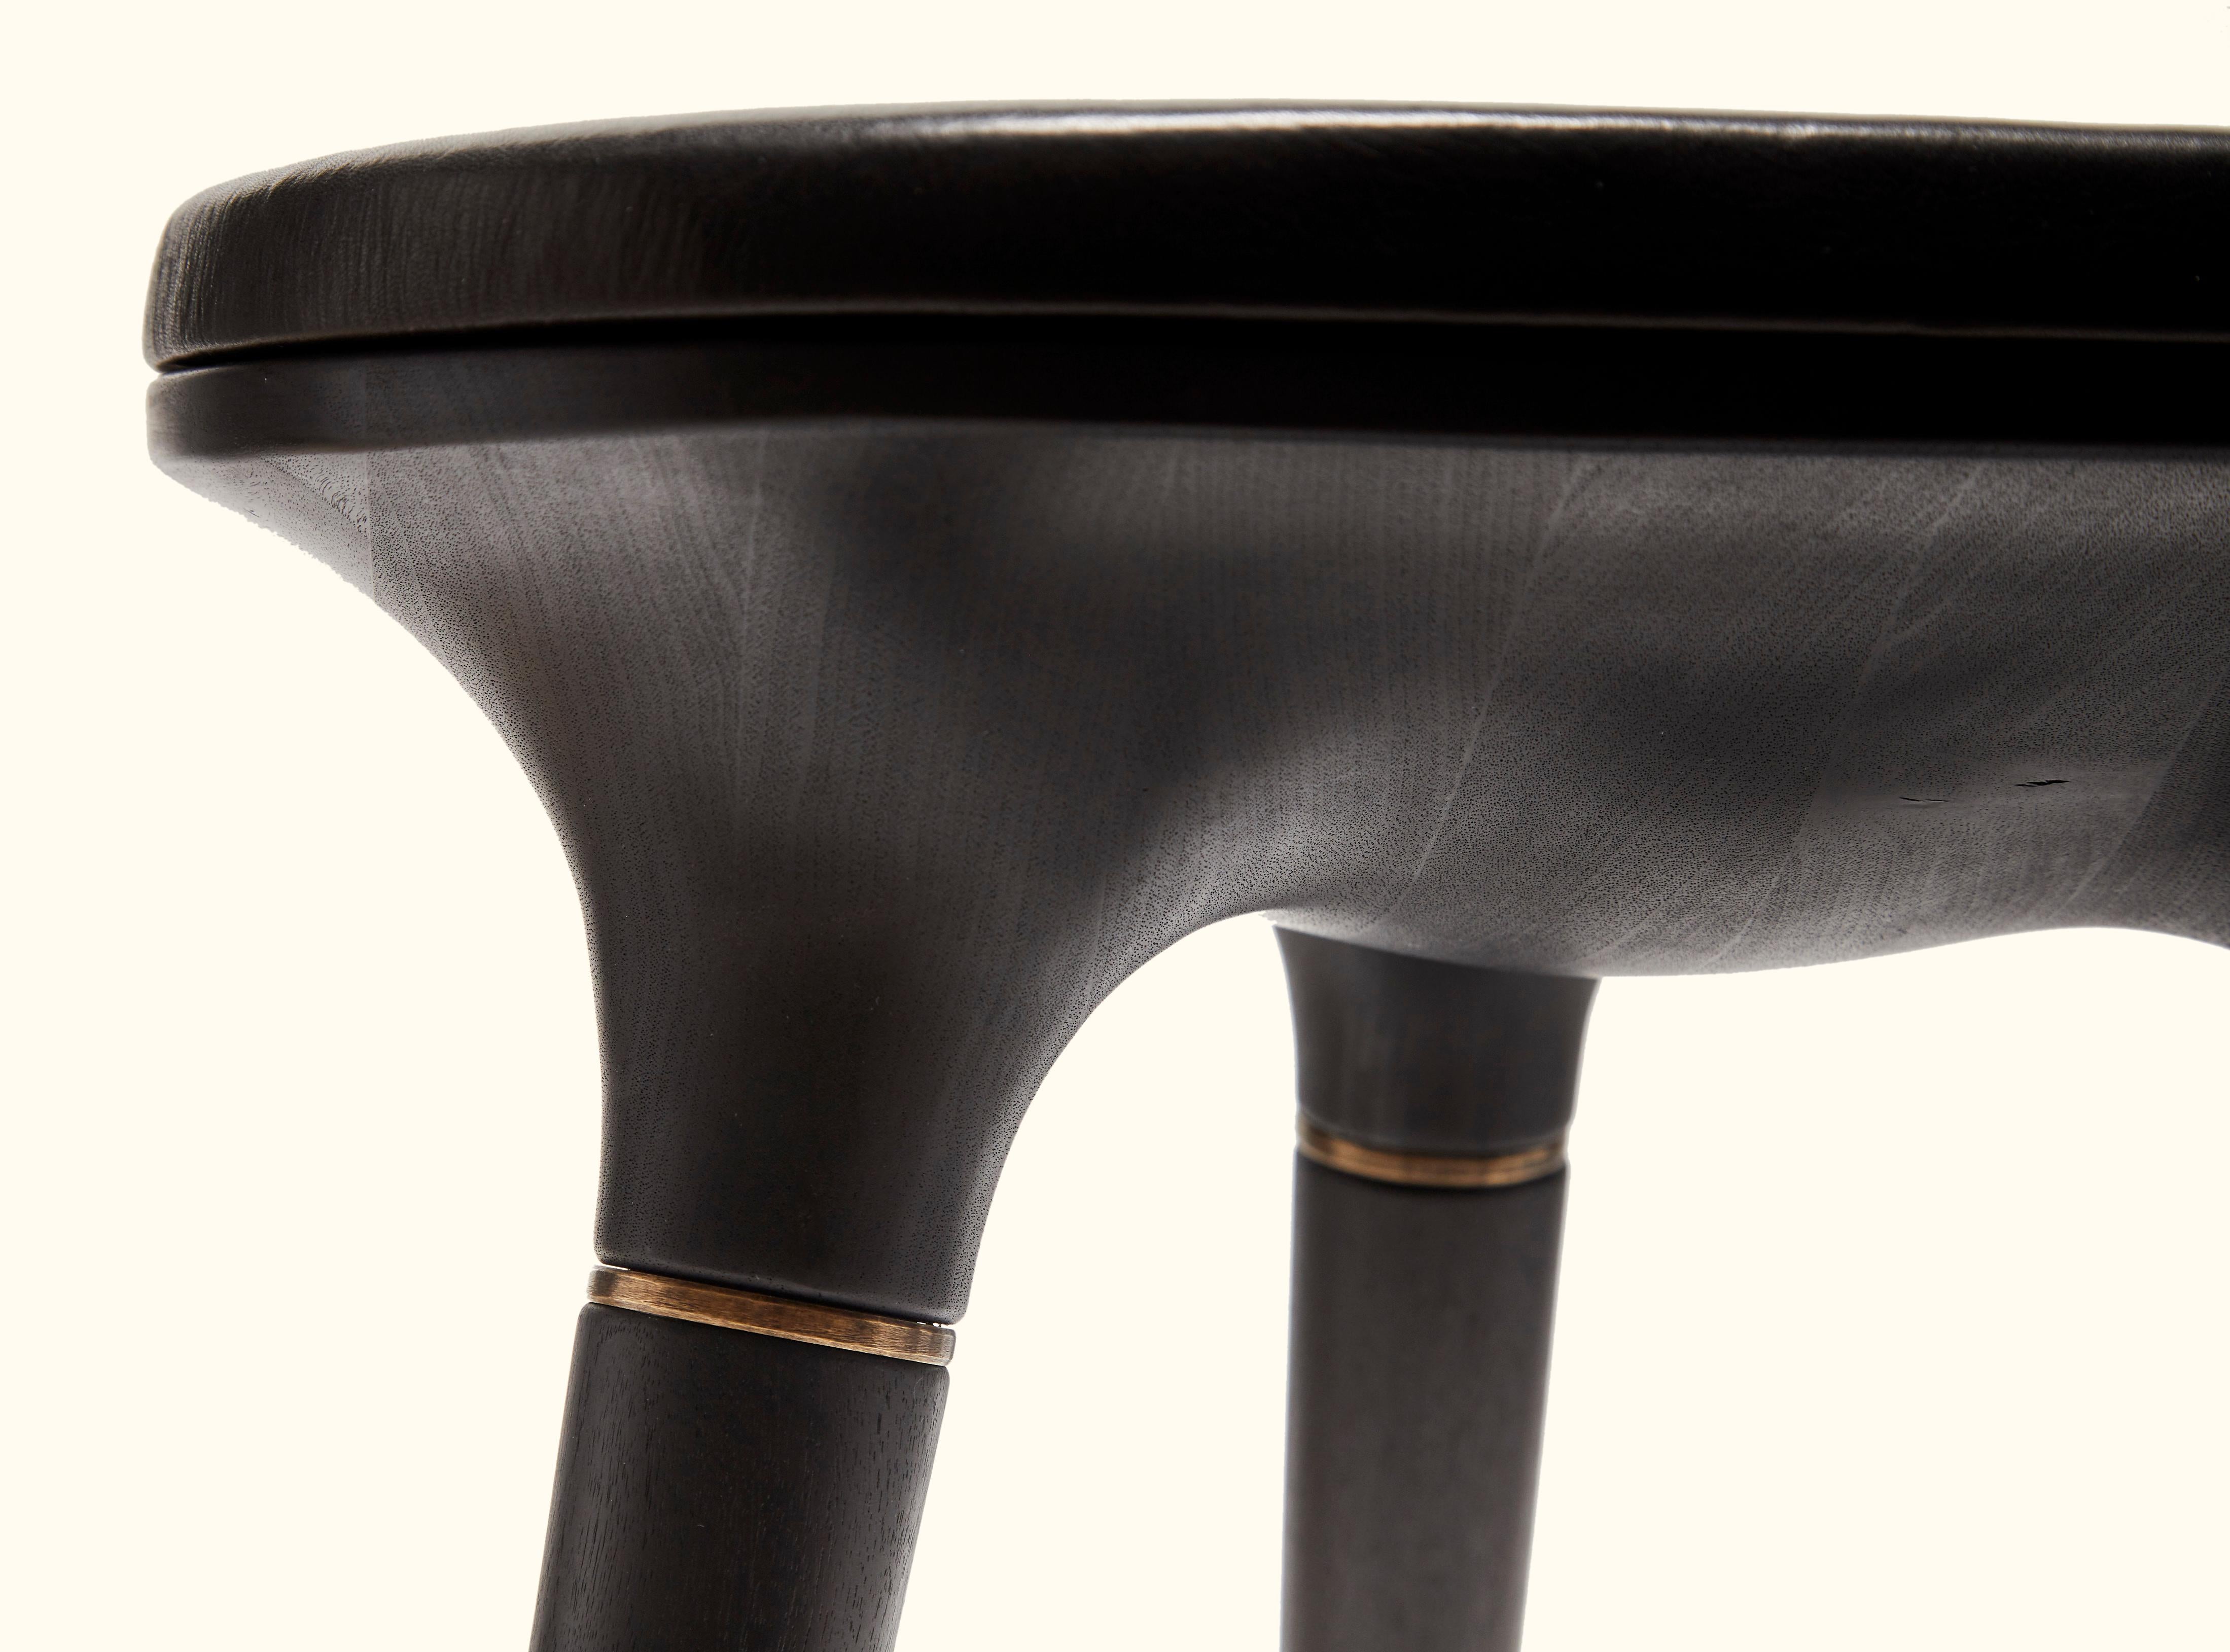 Mid-Century Modern Stool 001 by Vincent Pocsik for Lawson-Fenning